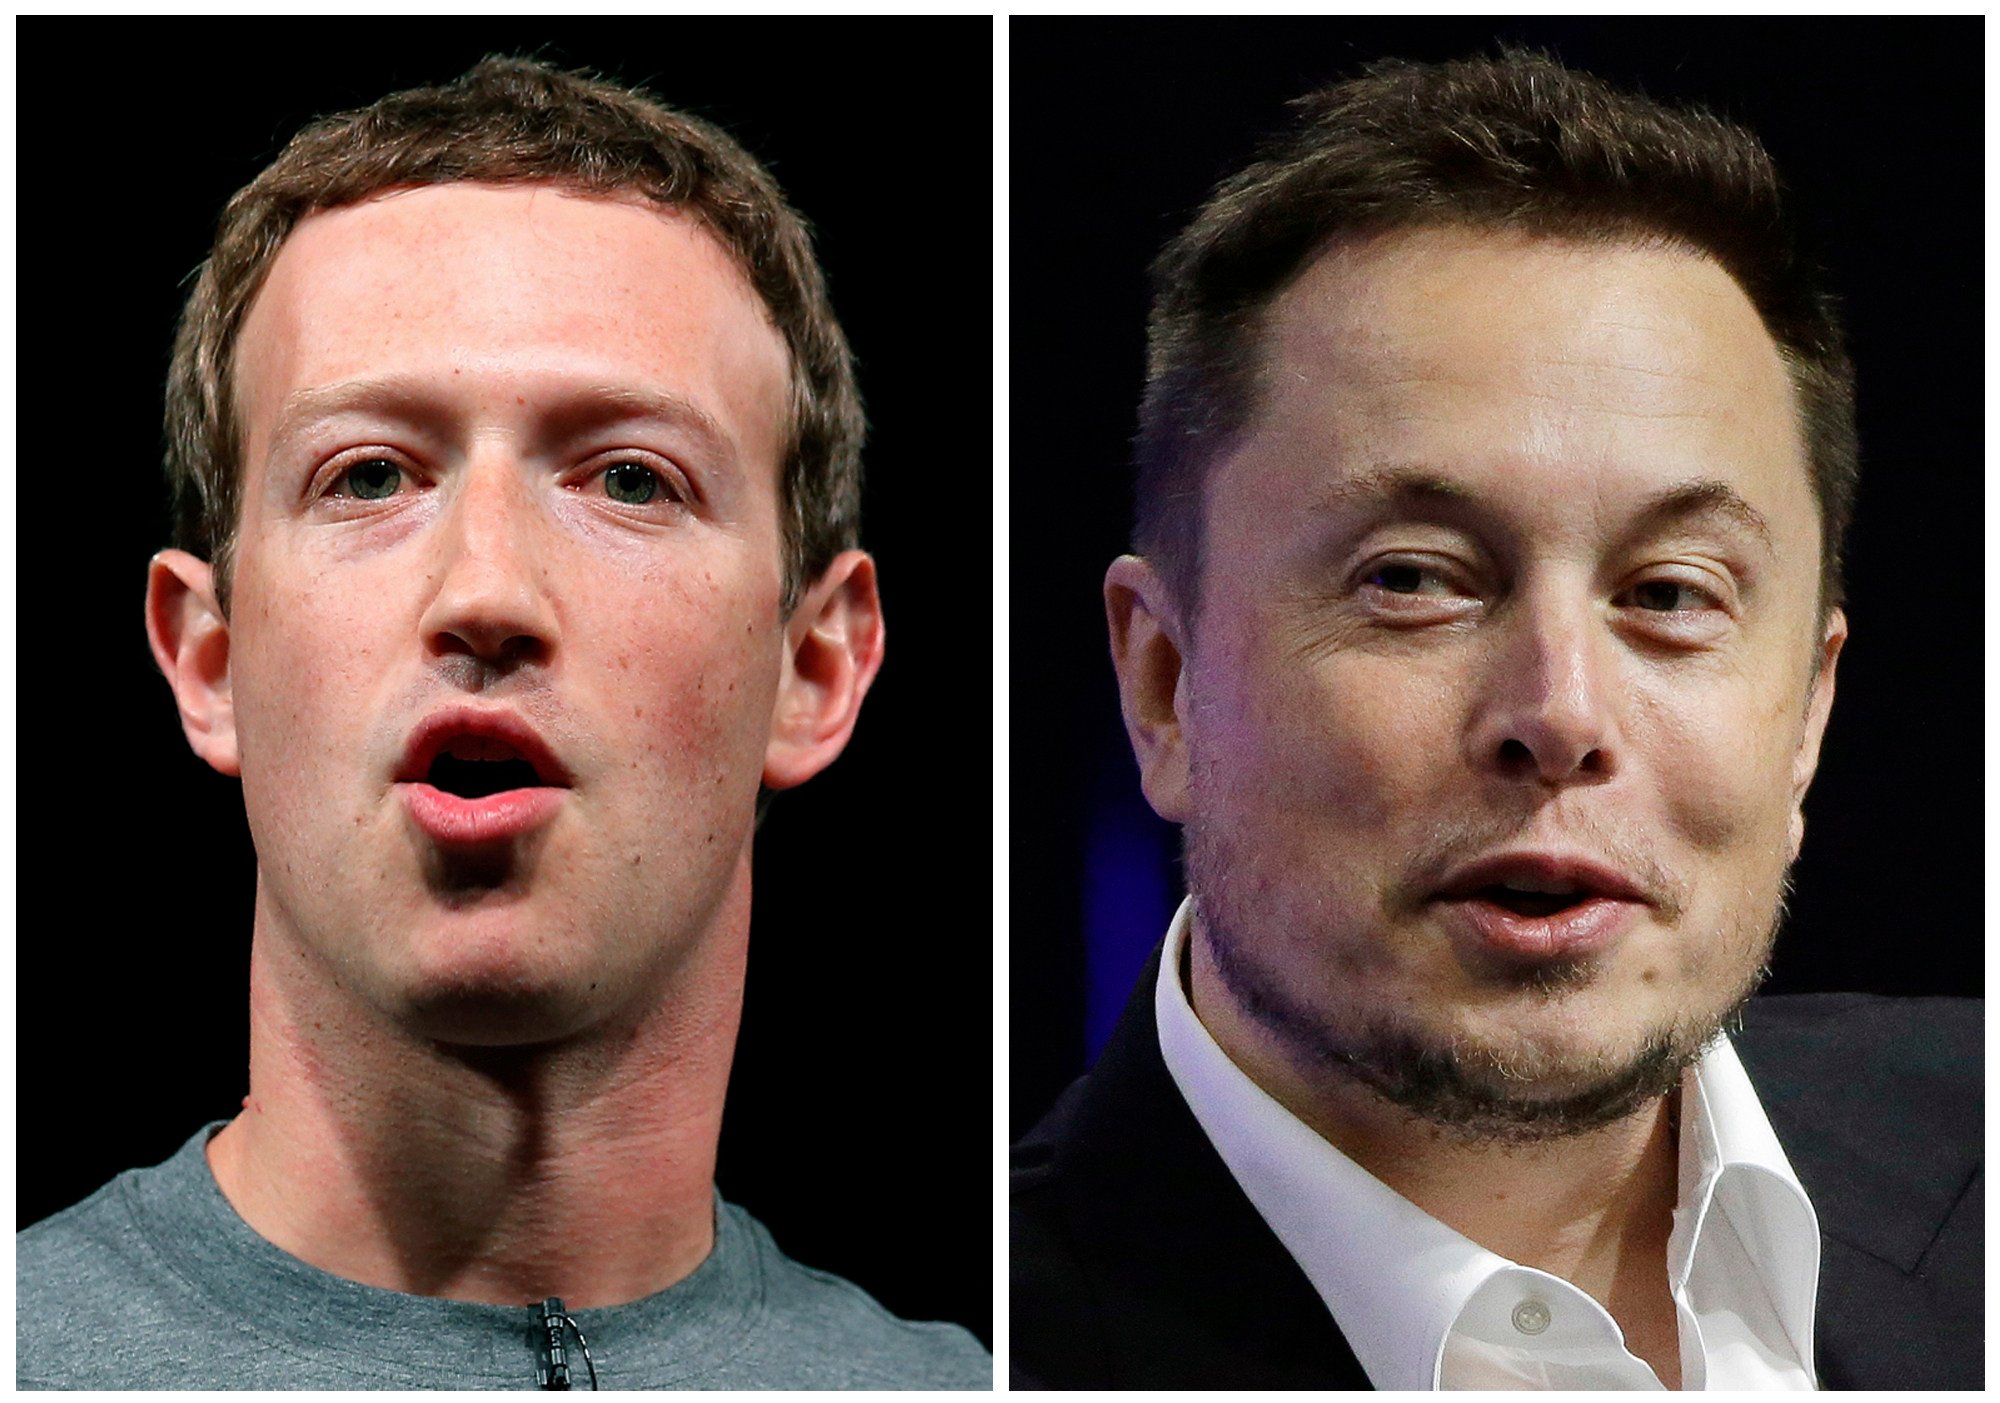 A potential cage match between Facebook CEO Mark Zuckerberg, left, and Twitteer CEO Elon Musk could be in the works. Photo: AP